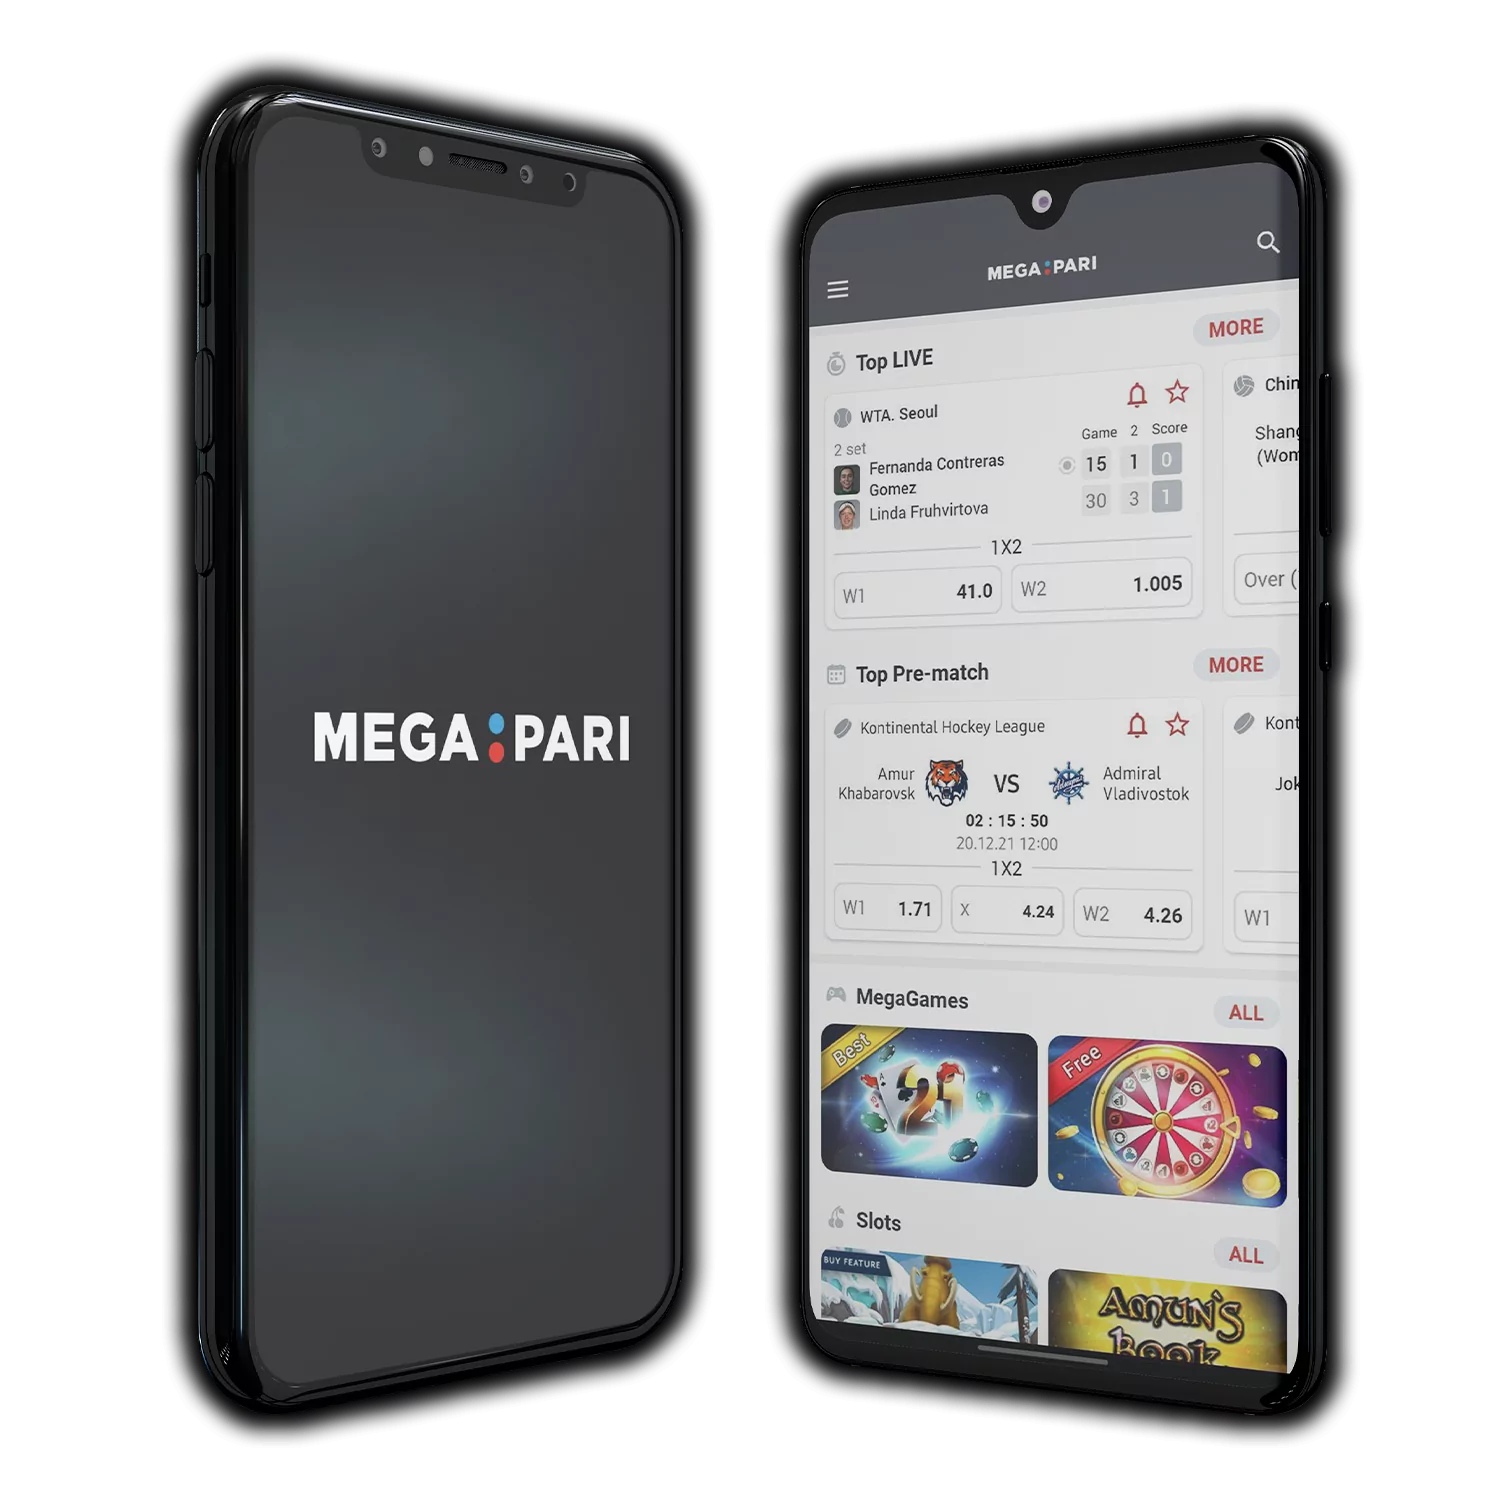 Download Megapari app for Android and iOS devices in India.